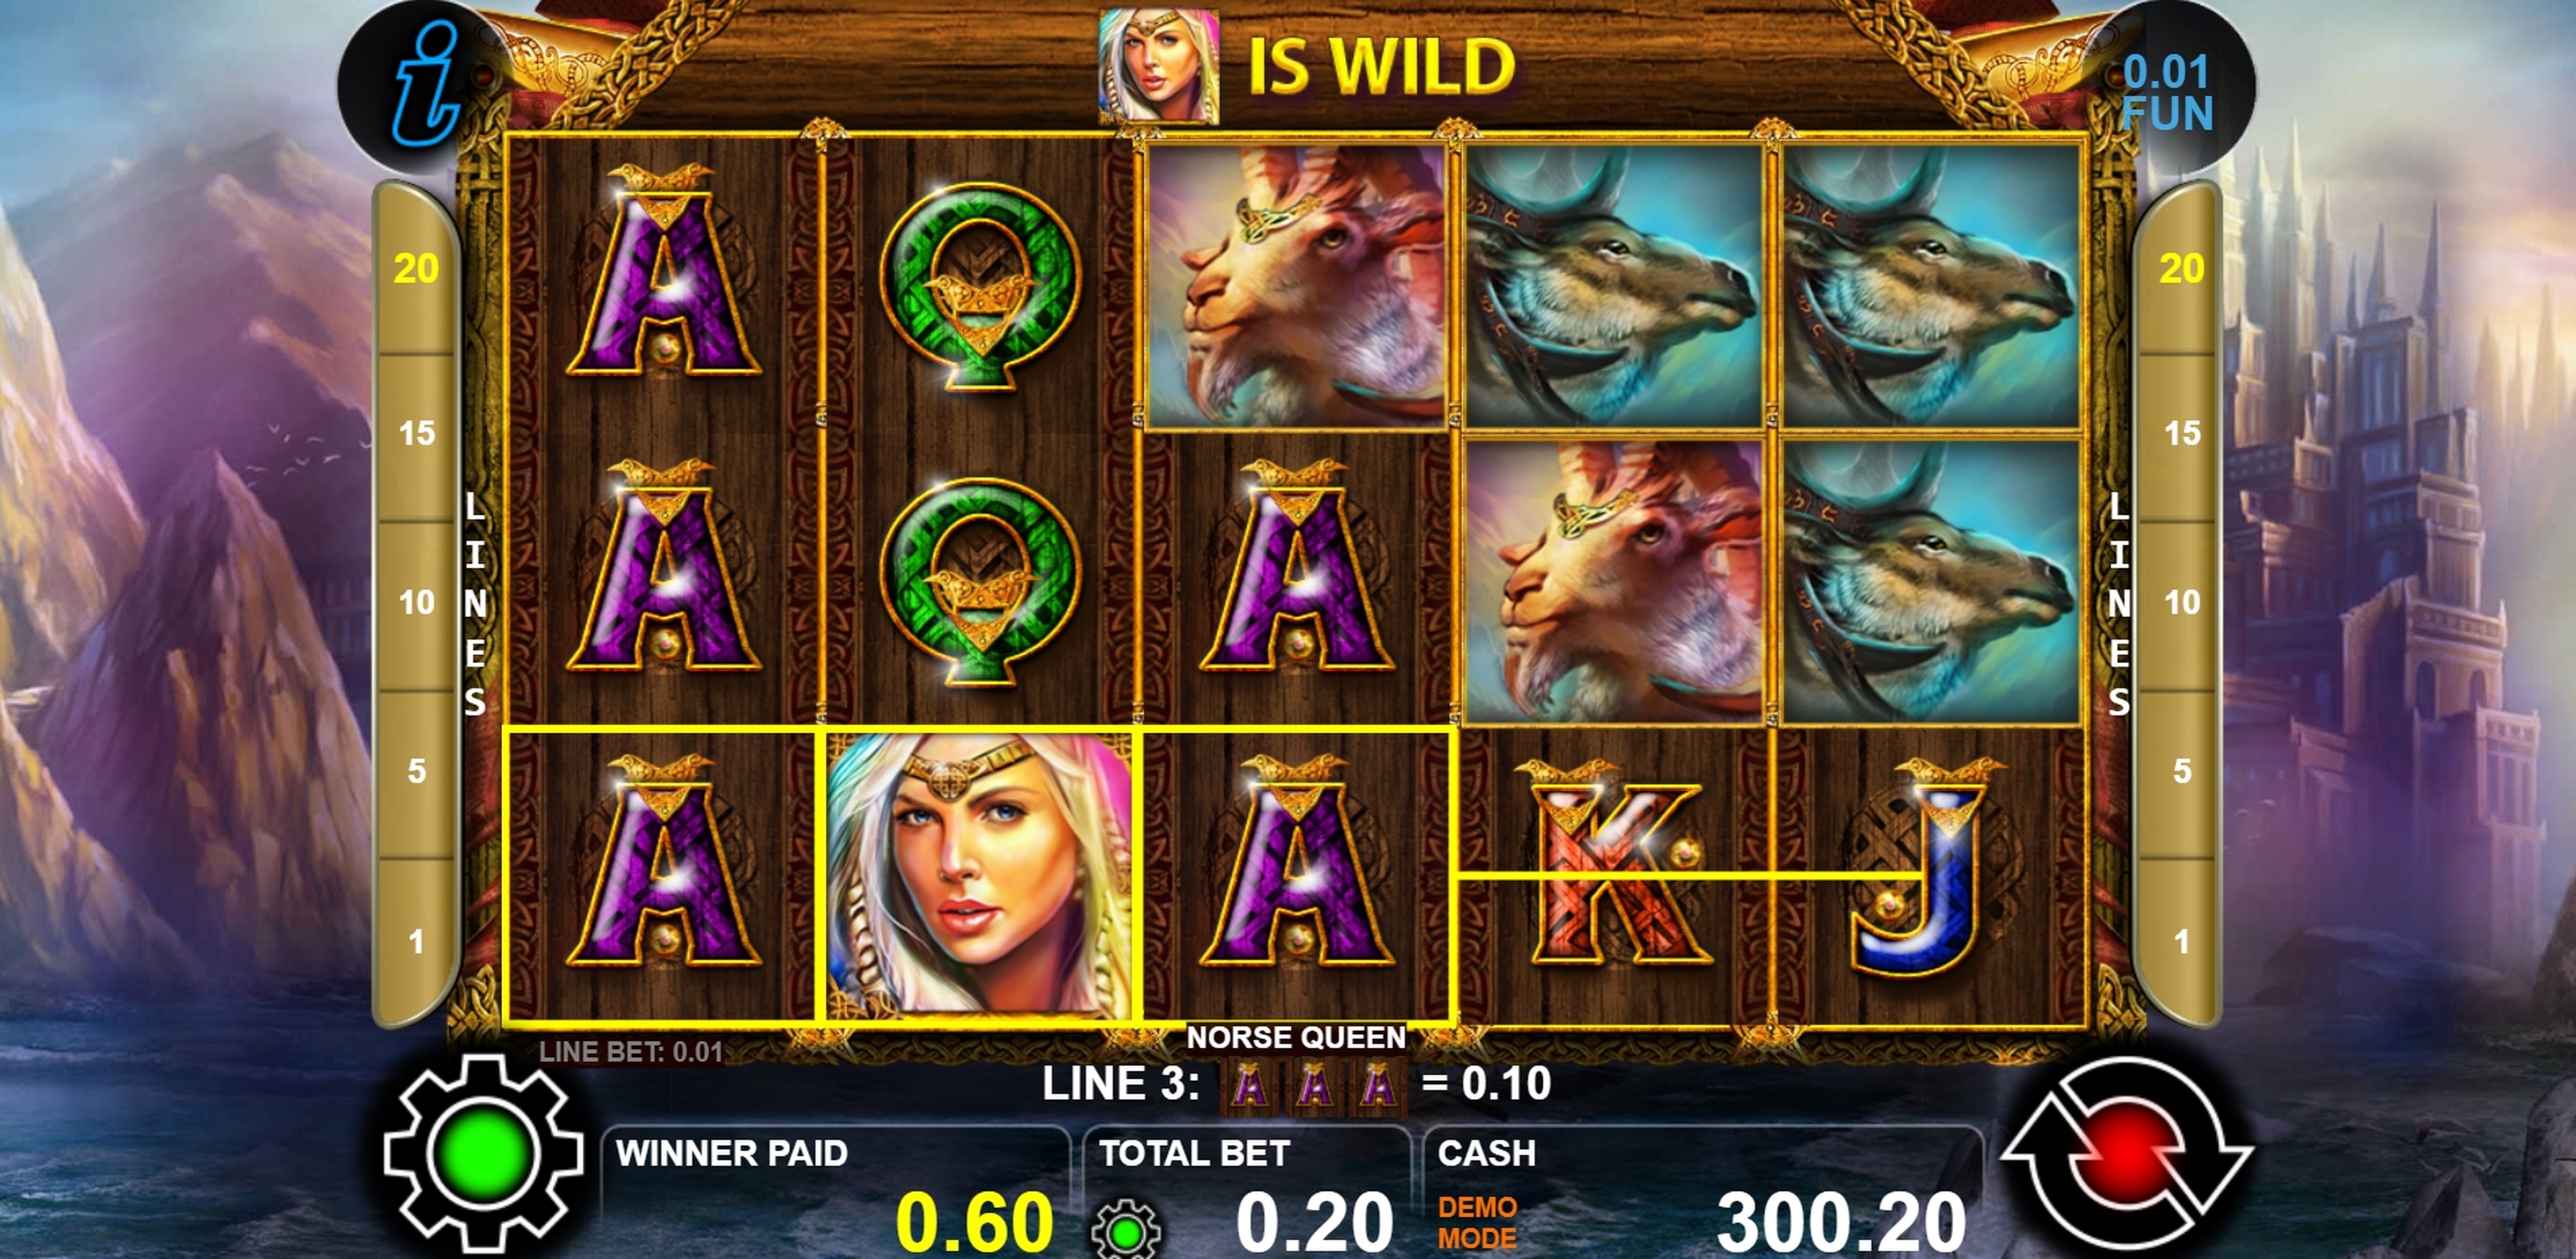 Win Money in Norse Queen Free Slot Game by casino technology